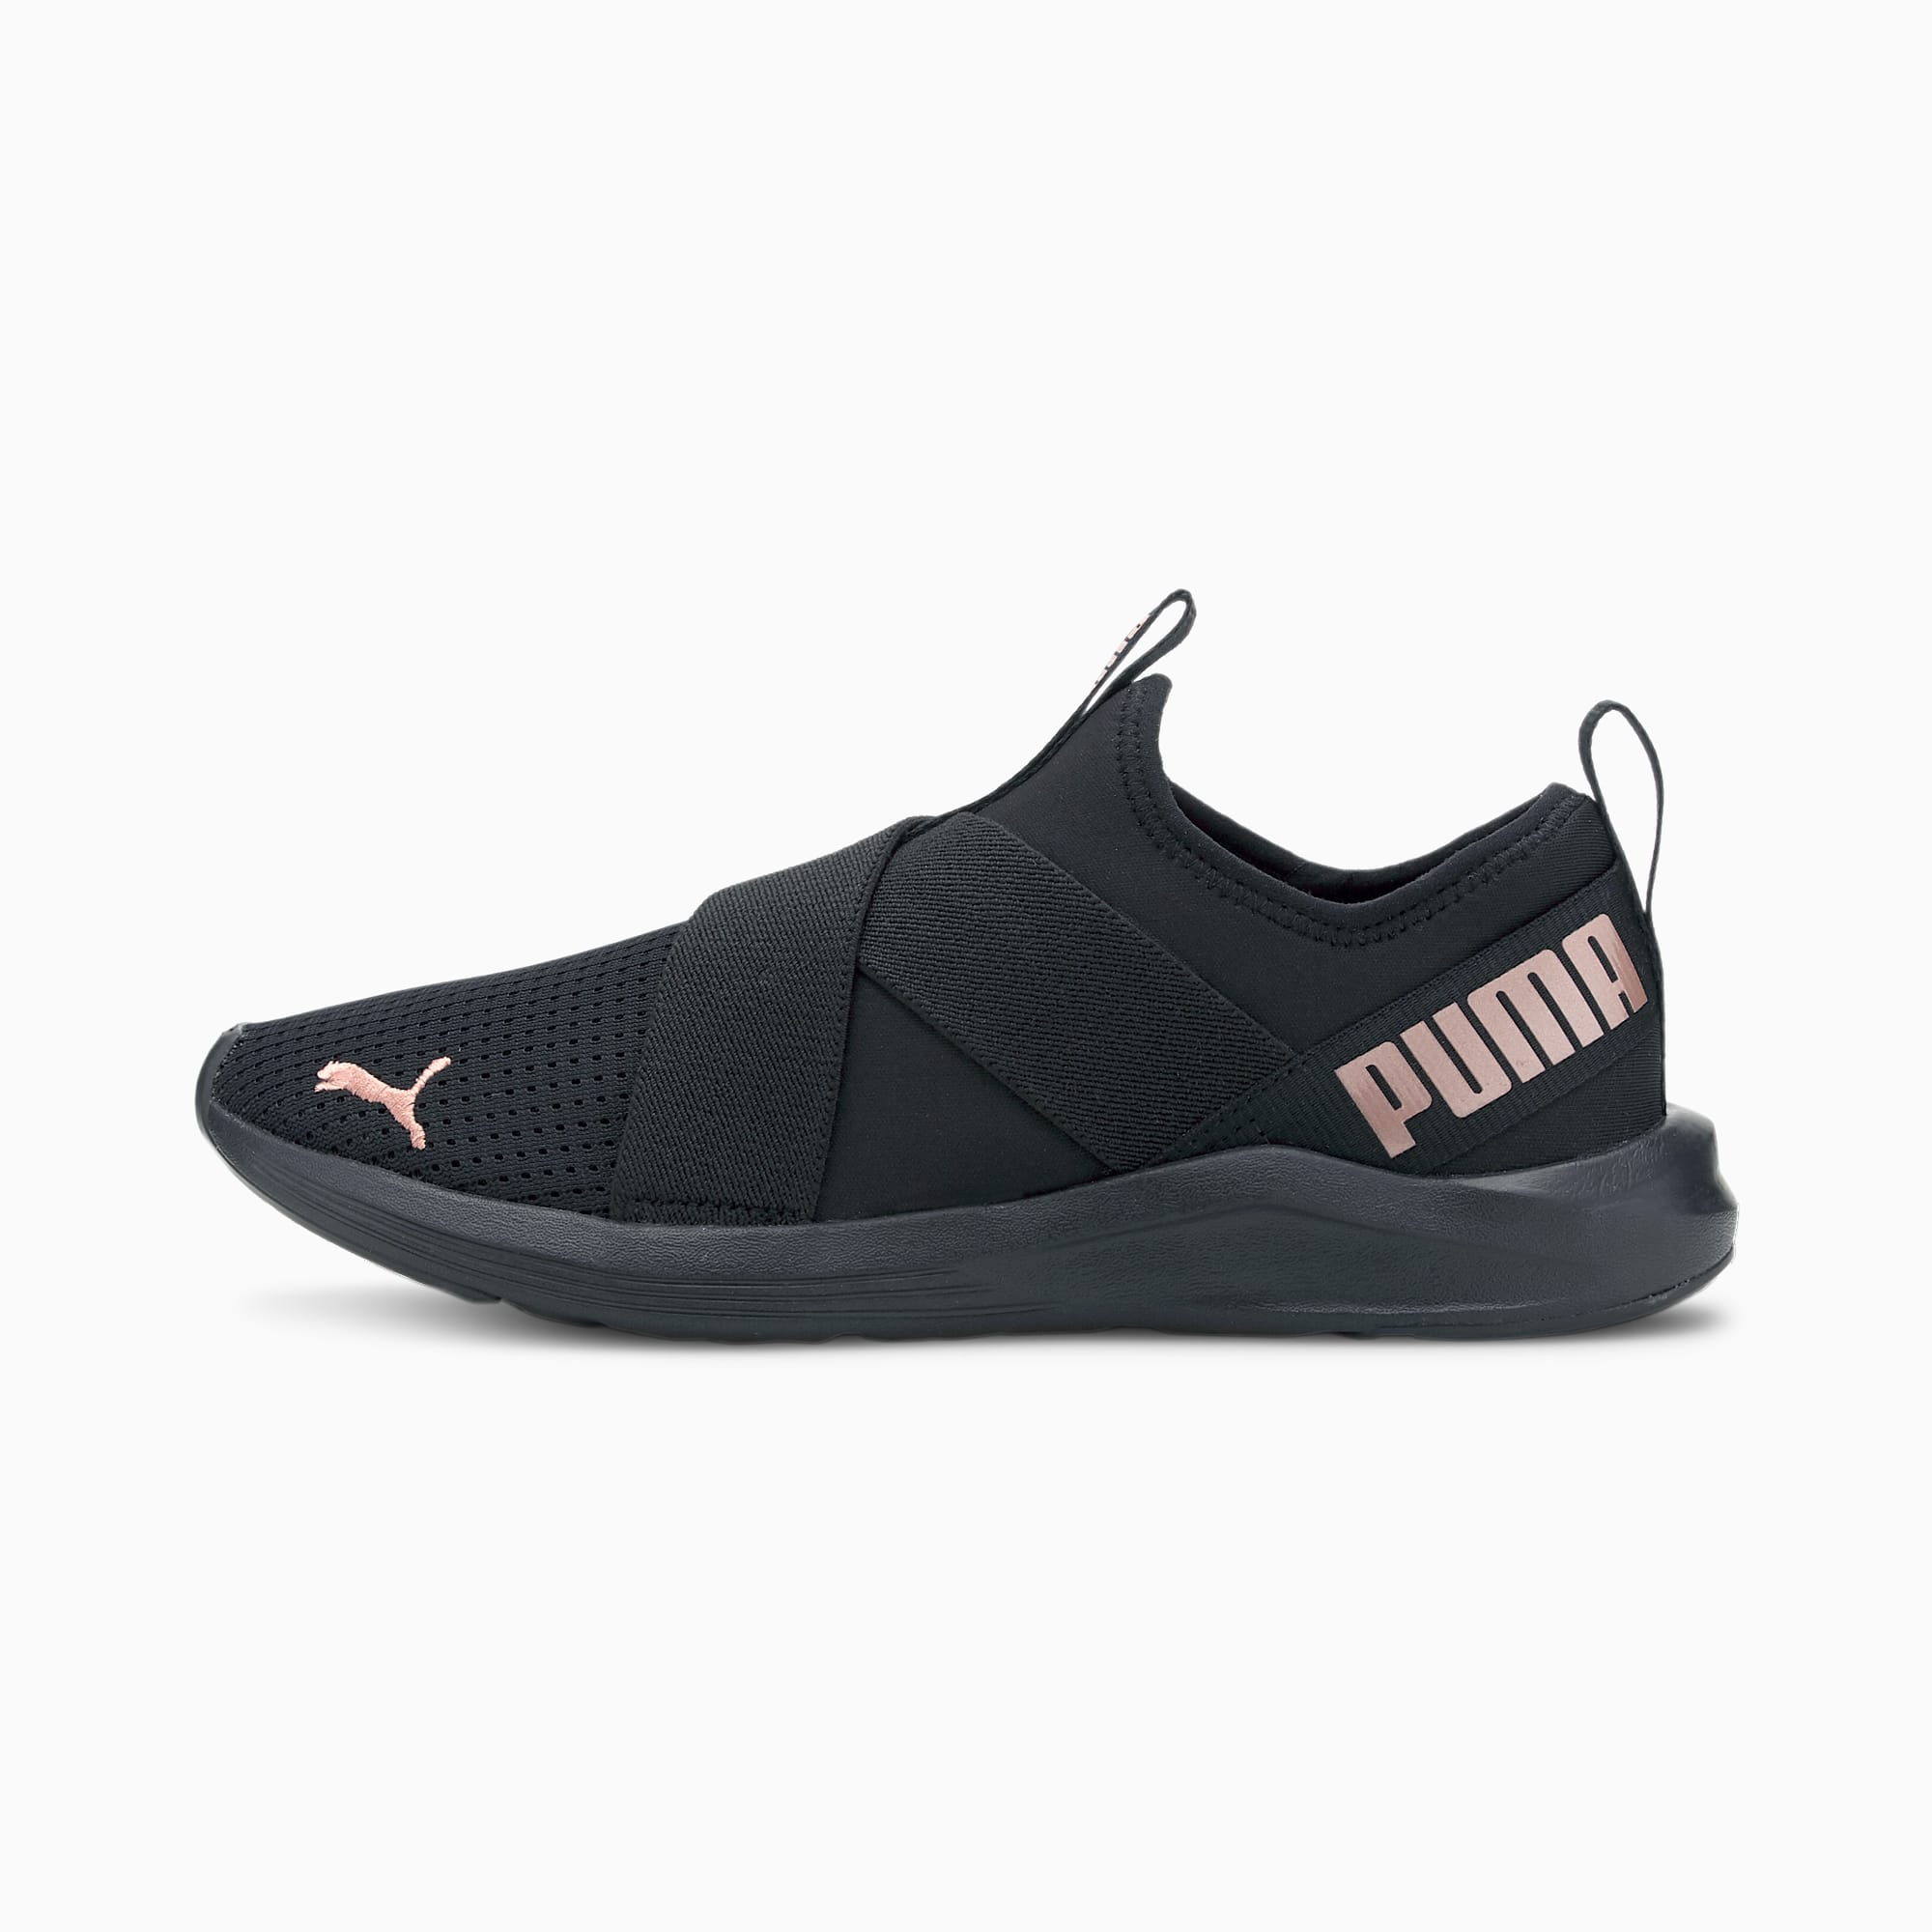 puma black shoes with rose gold